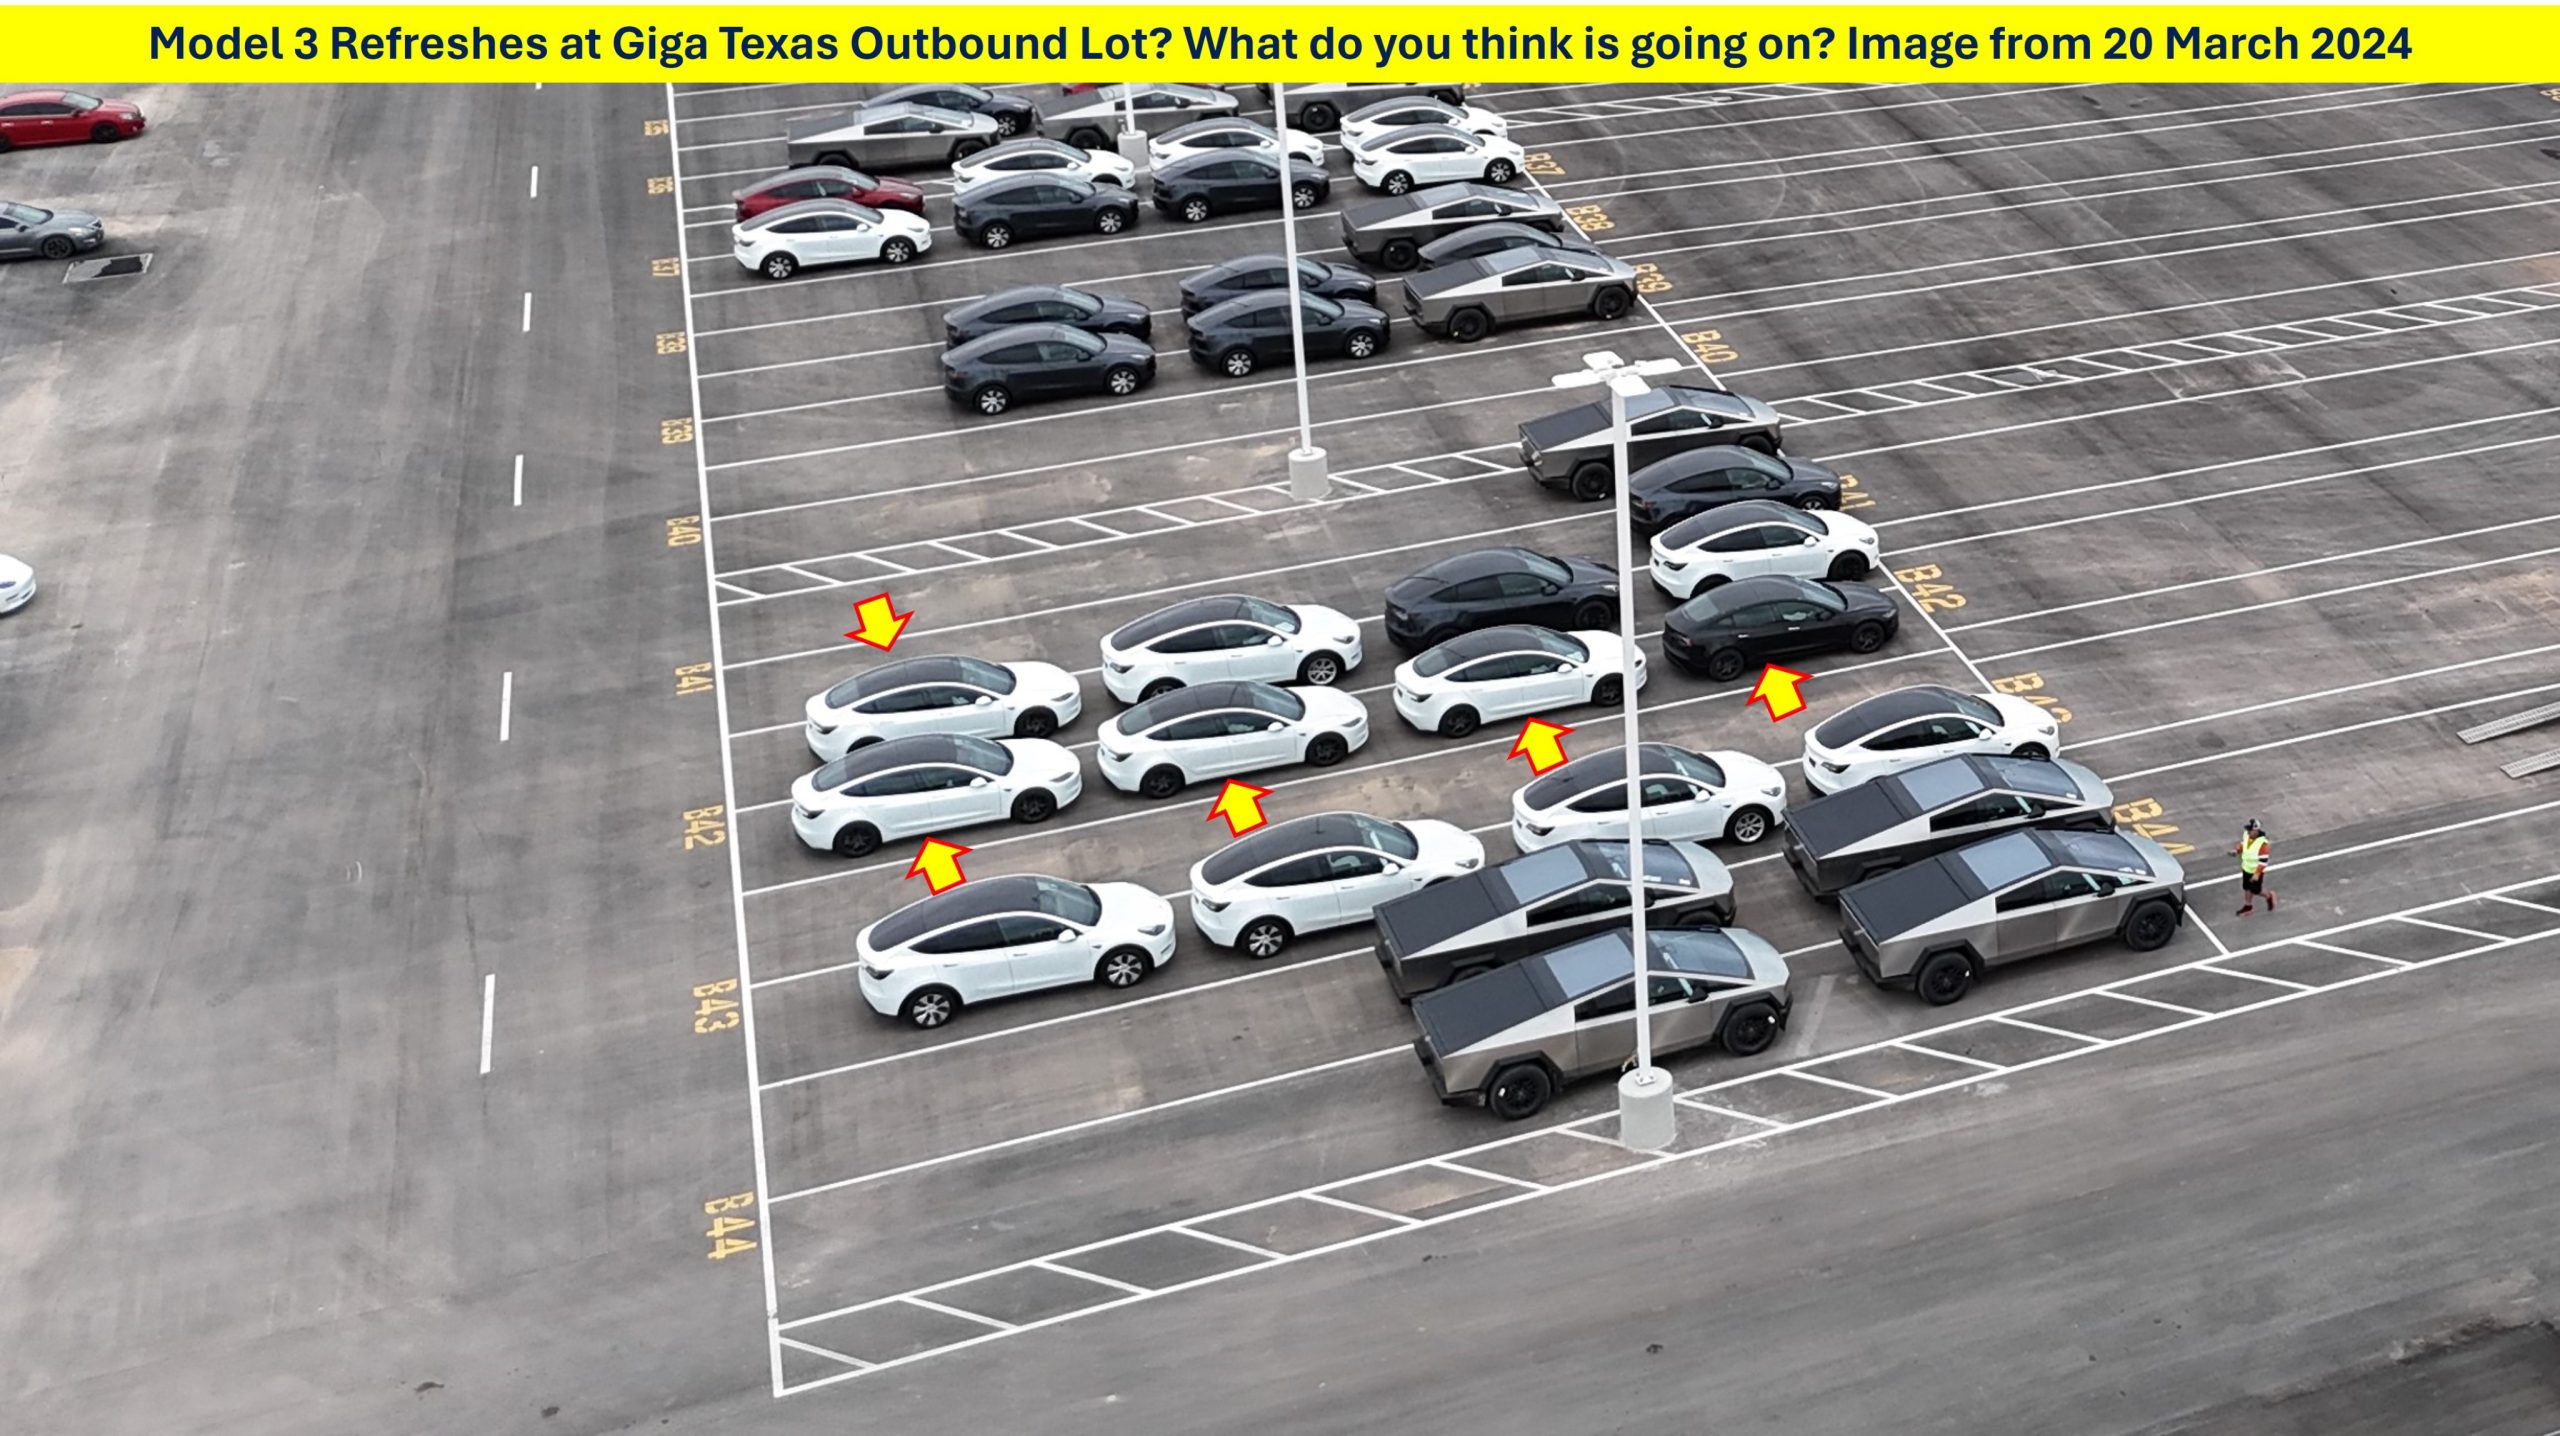 Tesla Model 3 sedans surprisingly spotted in Giga Texas outbound lot Auto Recent